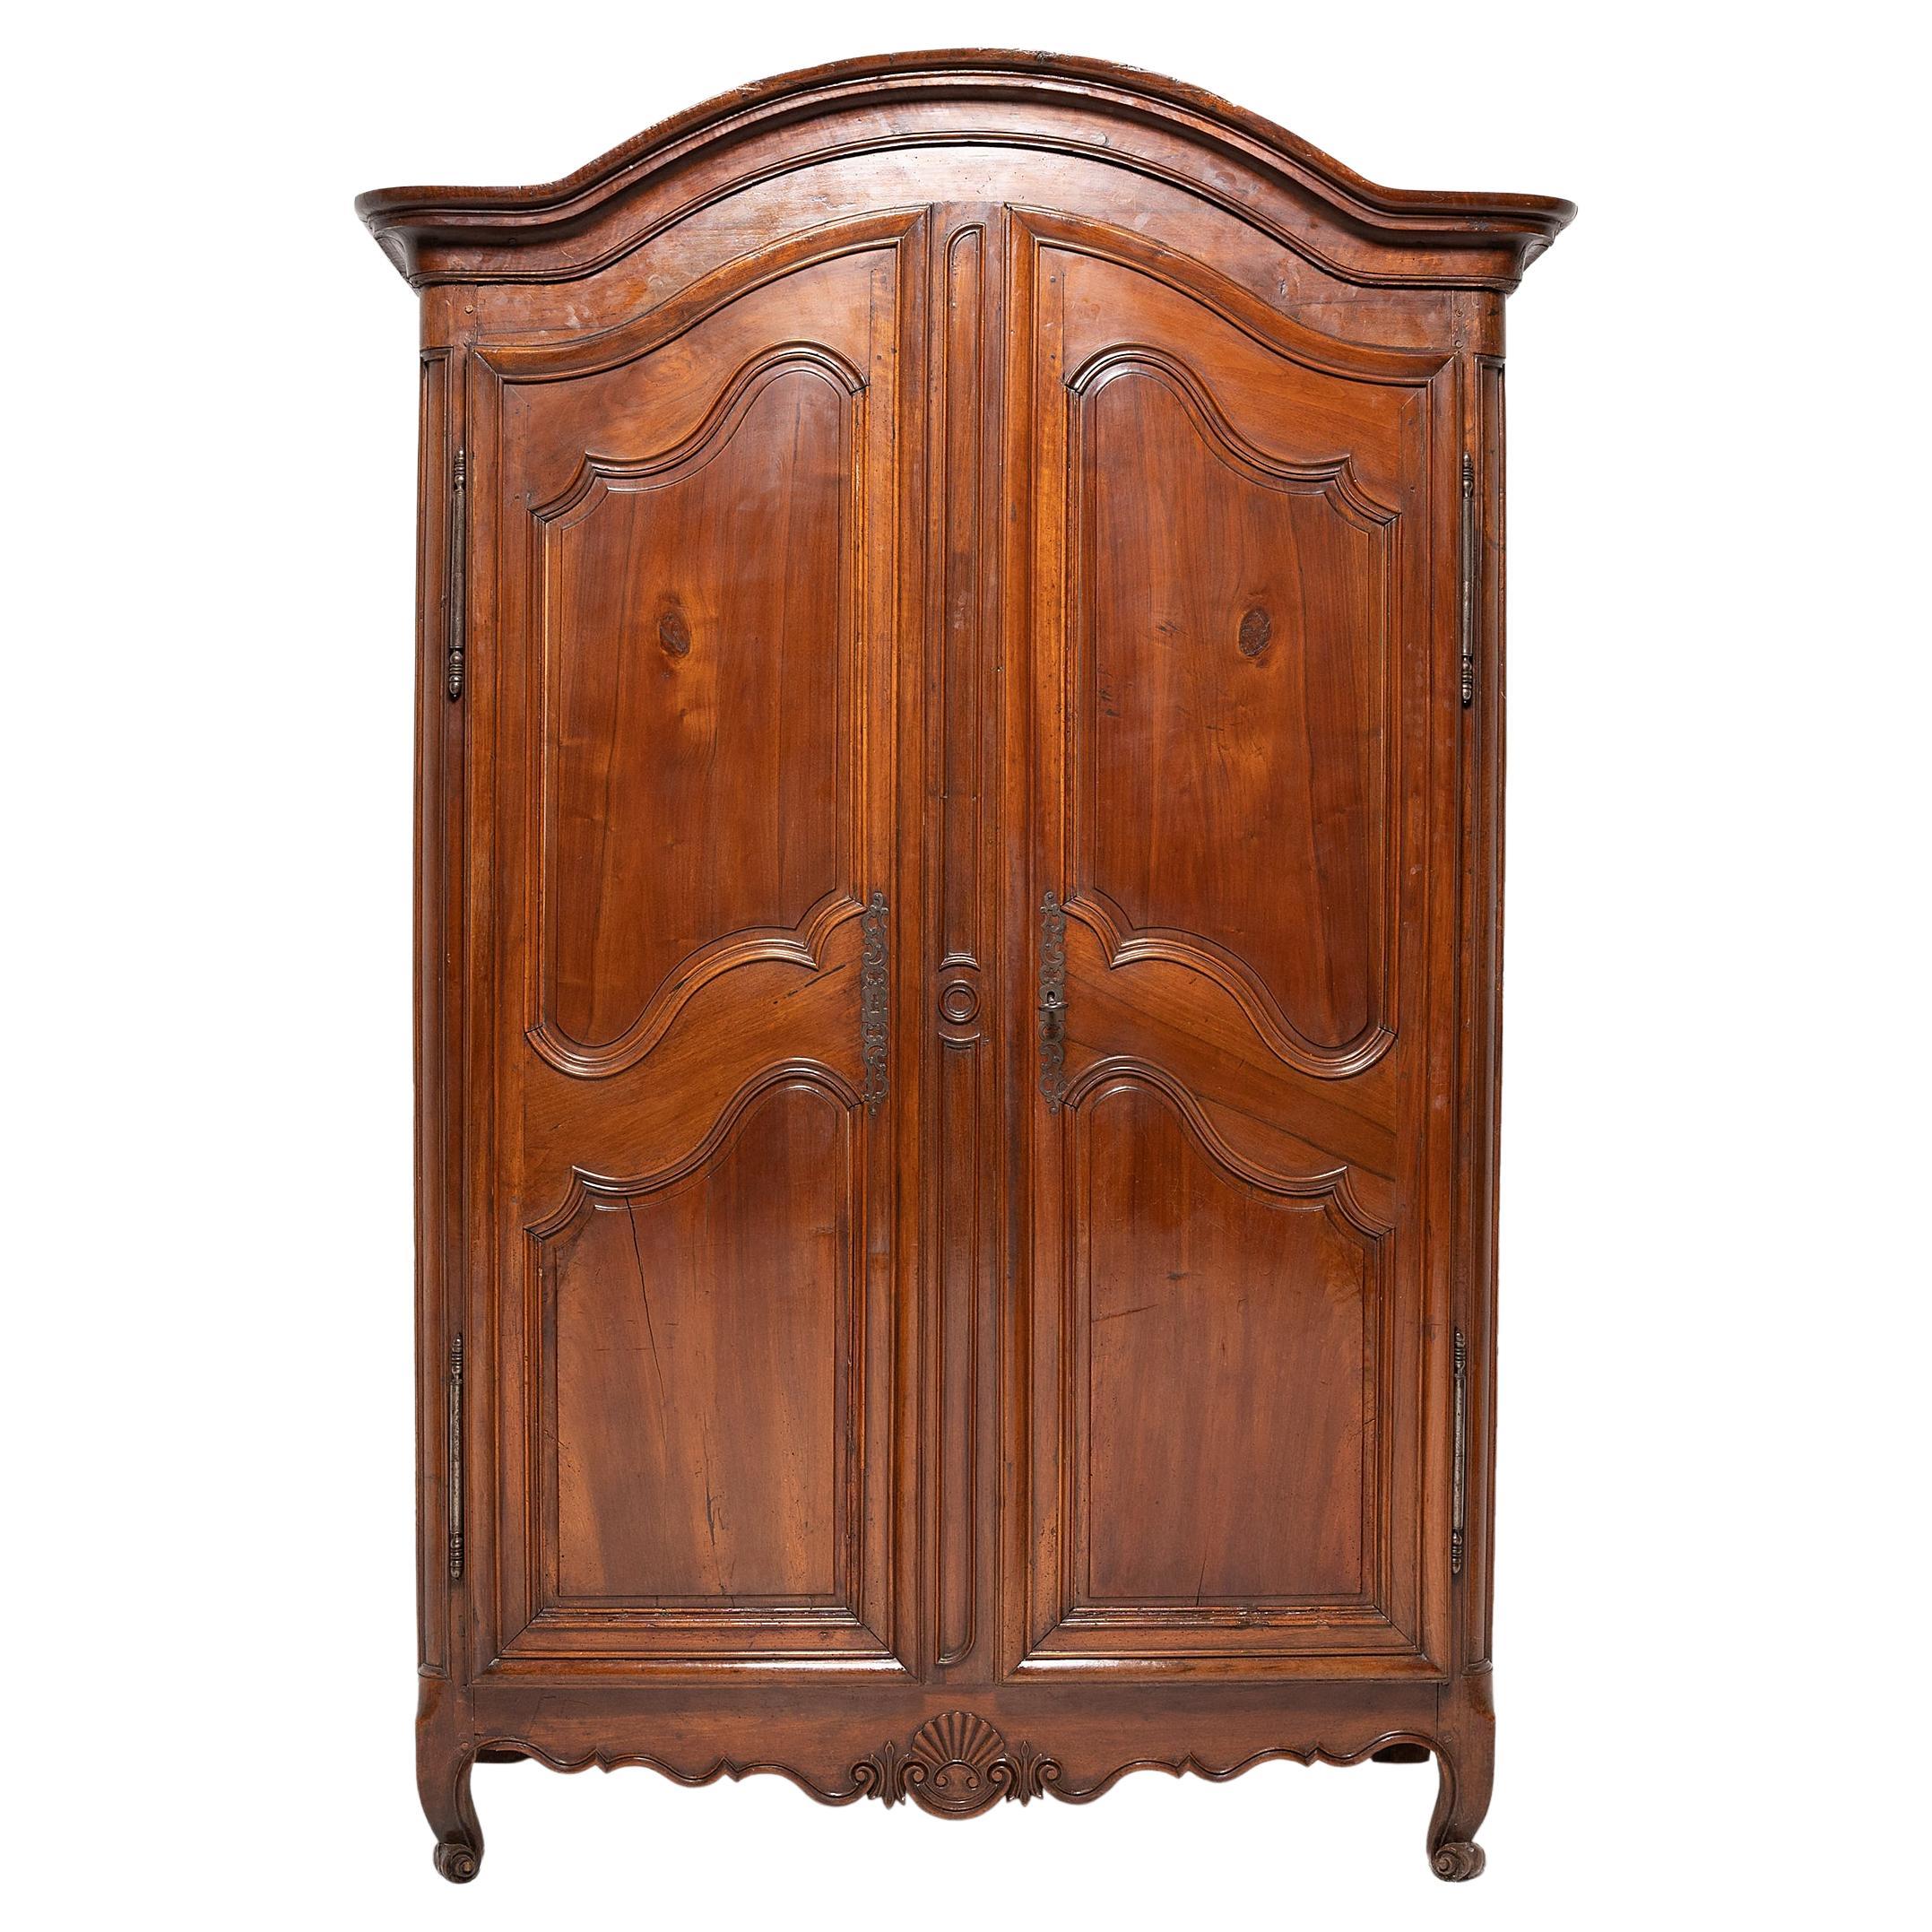 French Provincial Armoire with Arched Top, circa 1750 For Sale